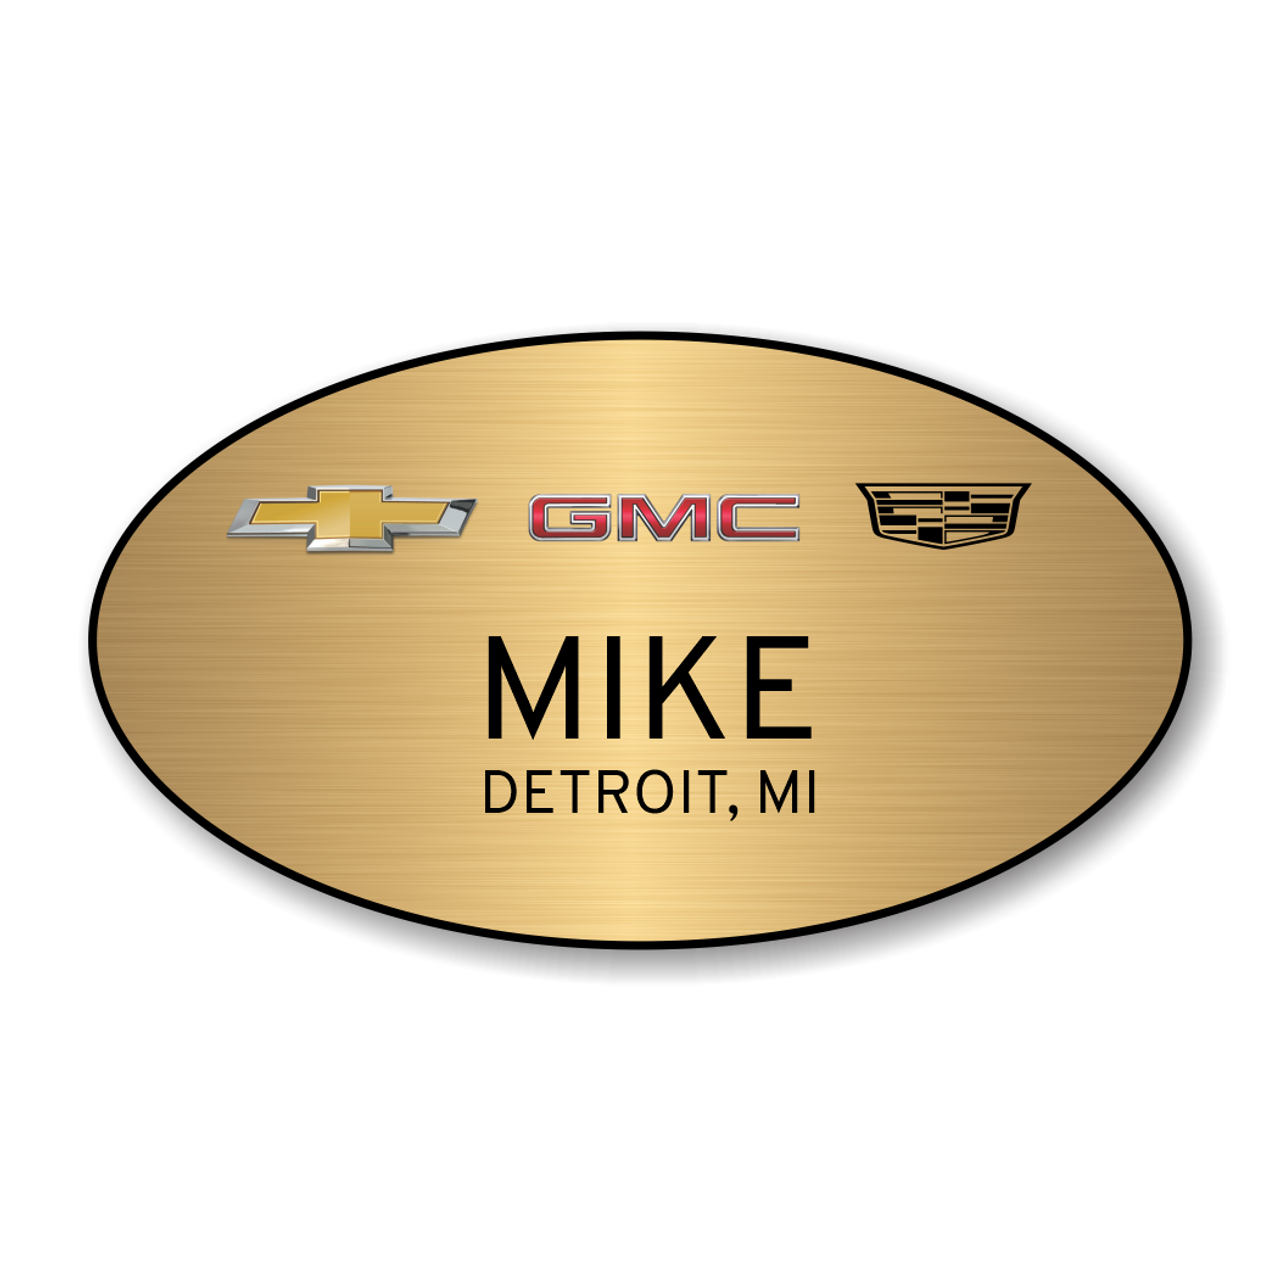 Chevrolet GMC Cadillac Gold Oval Name Badge Current Logos